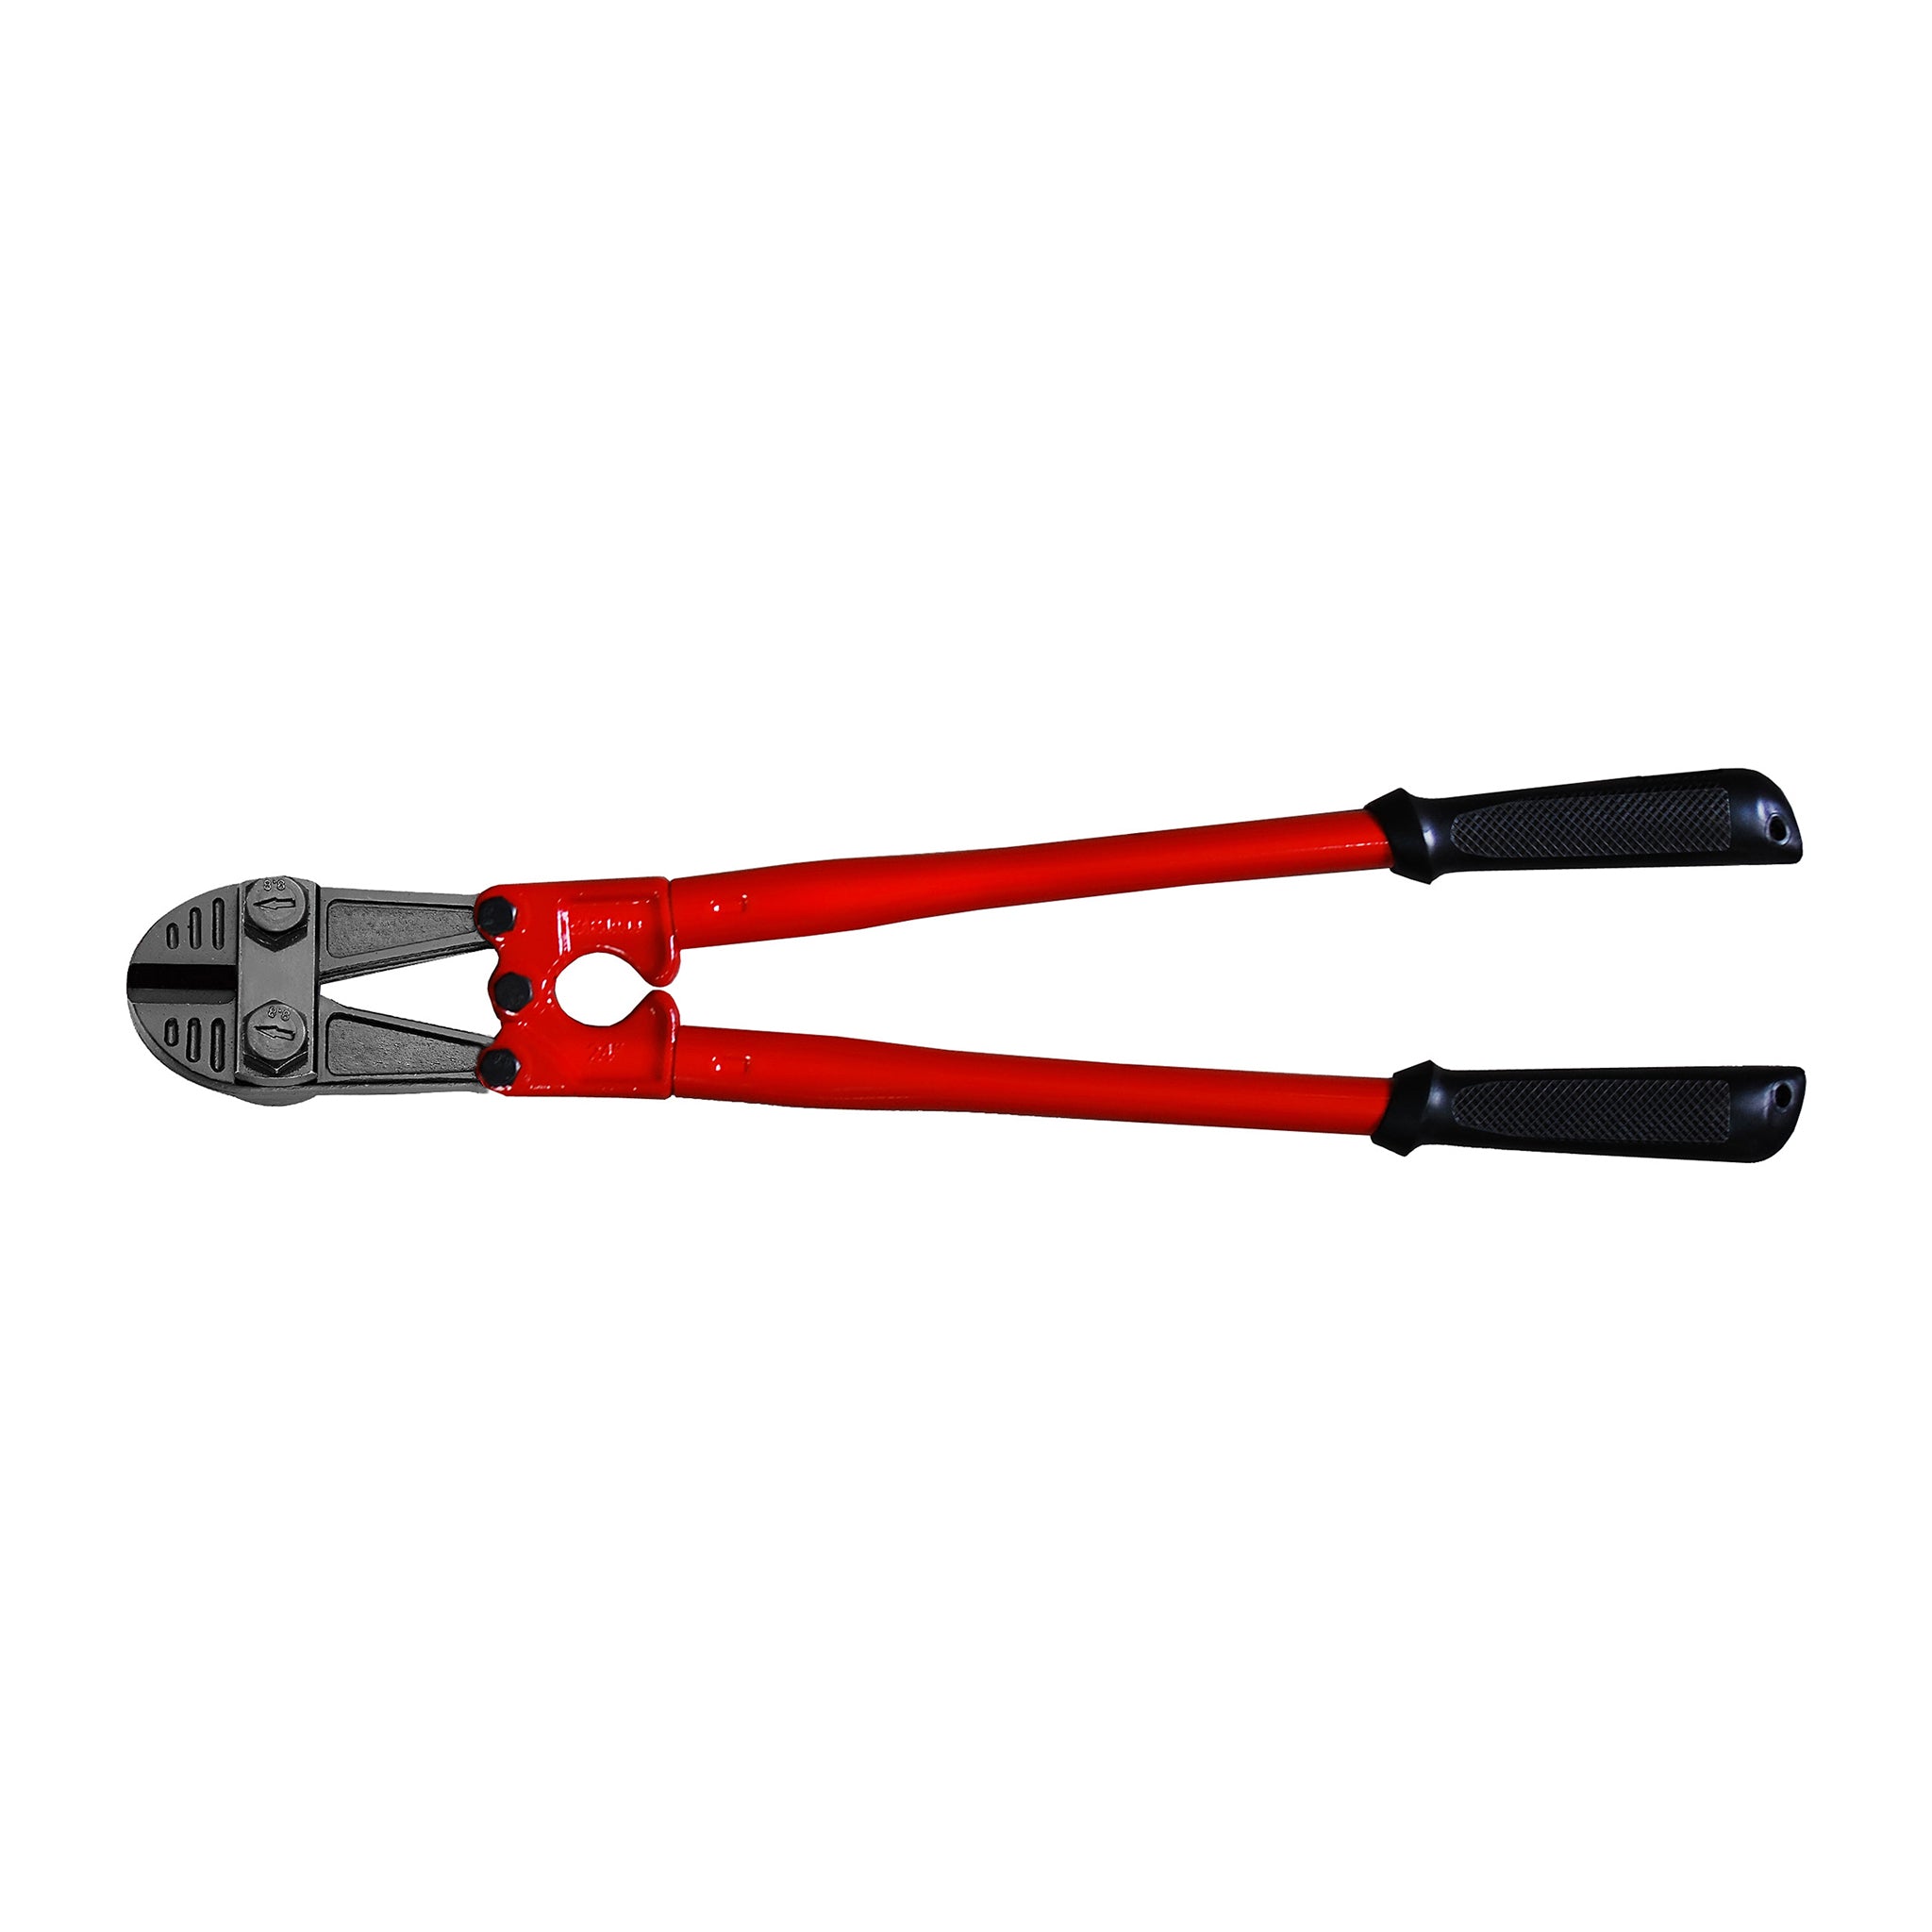 Teng Tools Bolt Cutters With Dipped Handle 8 To 36 Inches - 8 Inch Mini